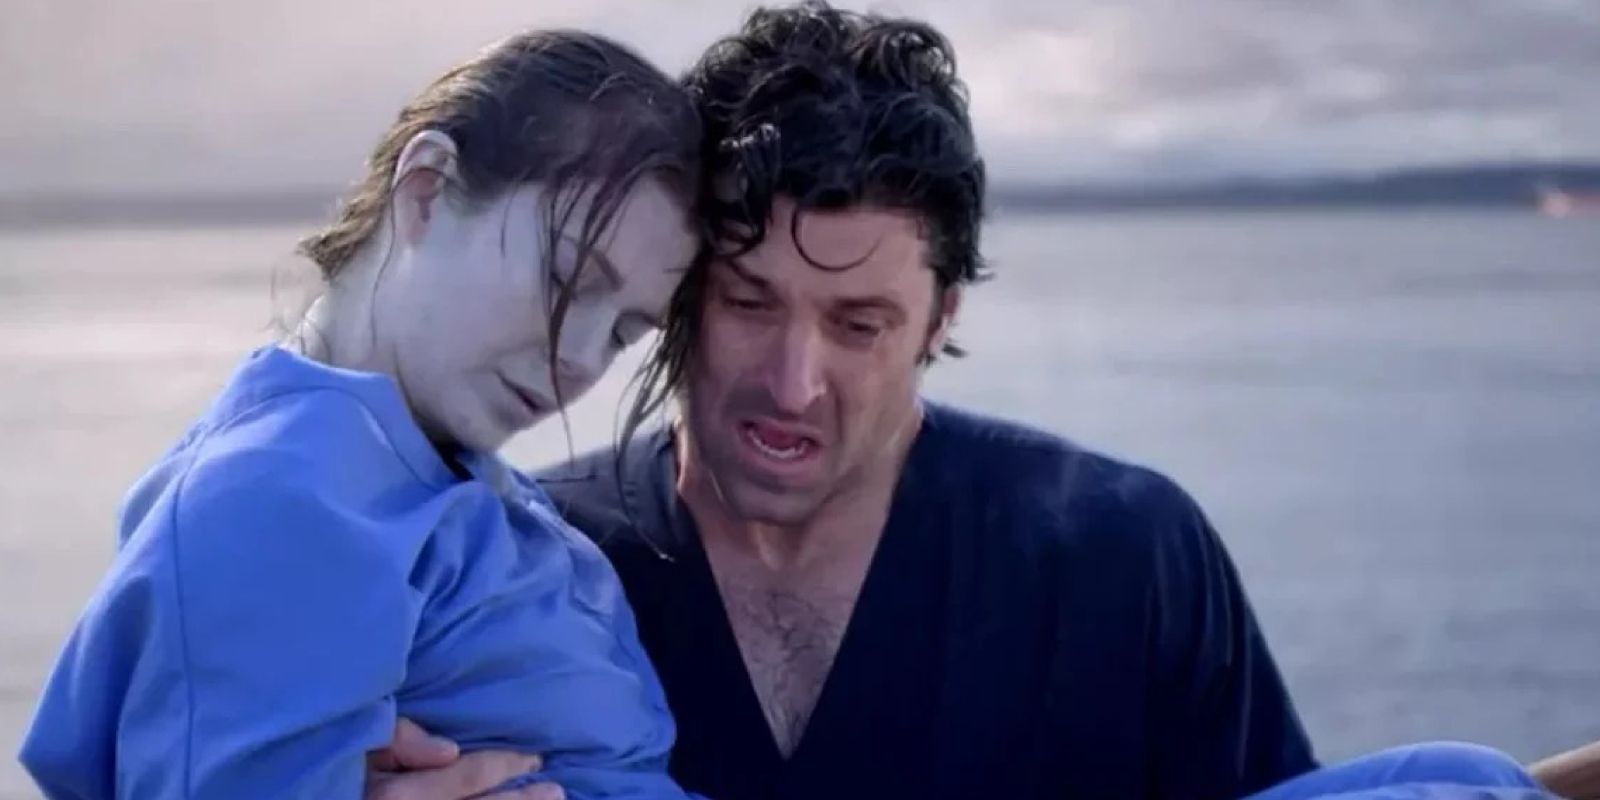 Derek carries a blue Meredith out of the freezing water in Grey's Anatomy Season 3.